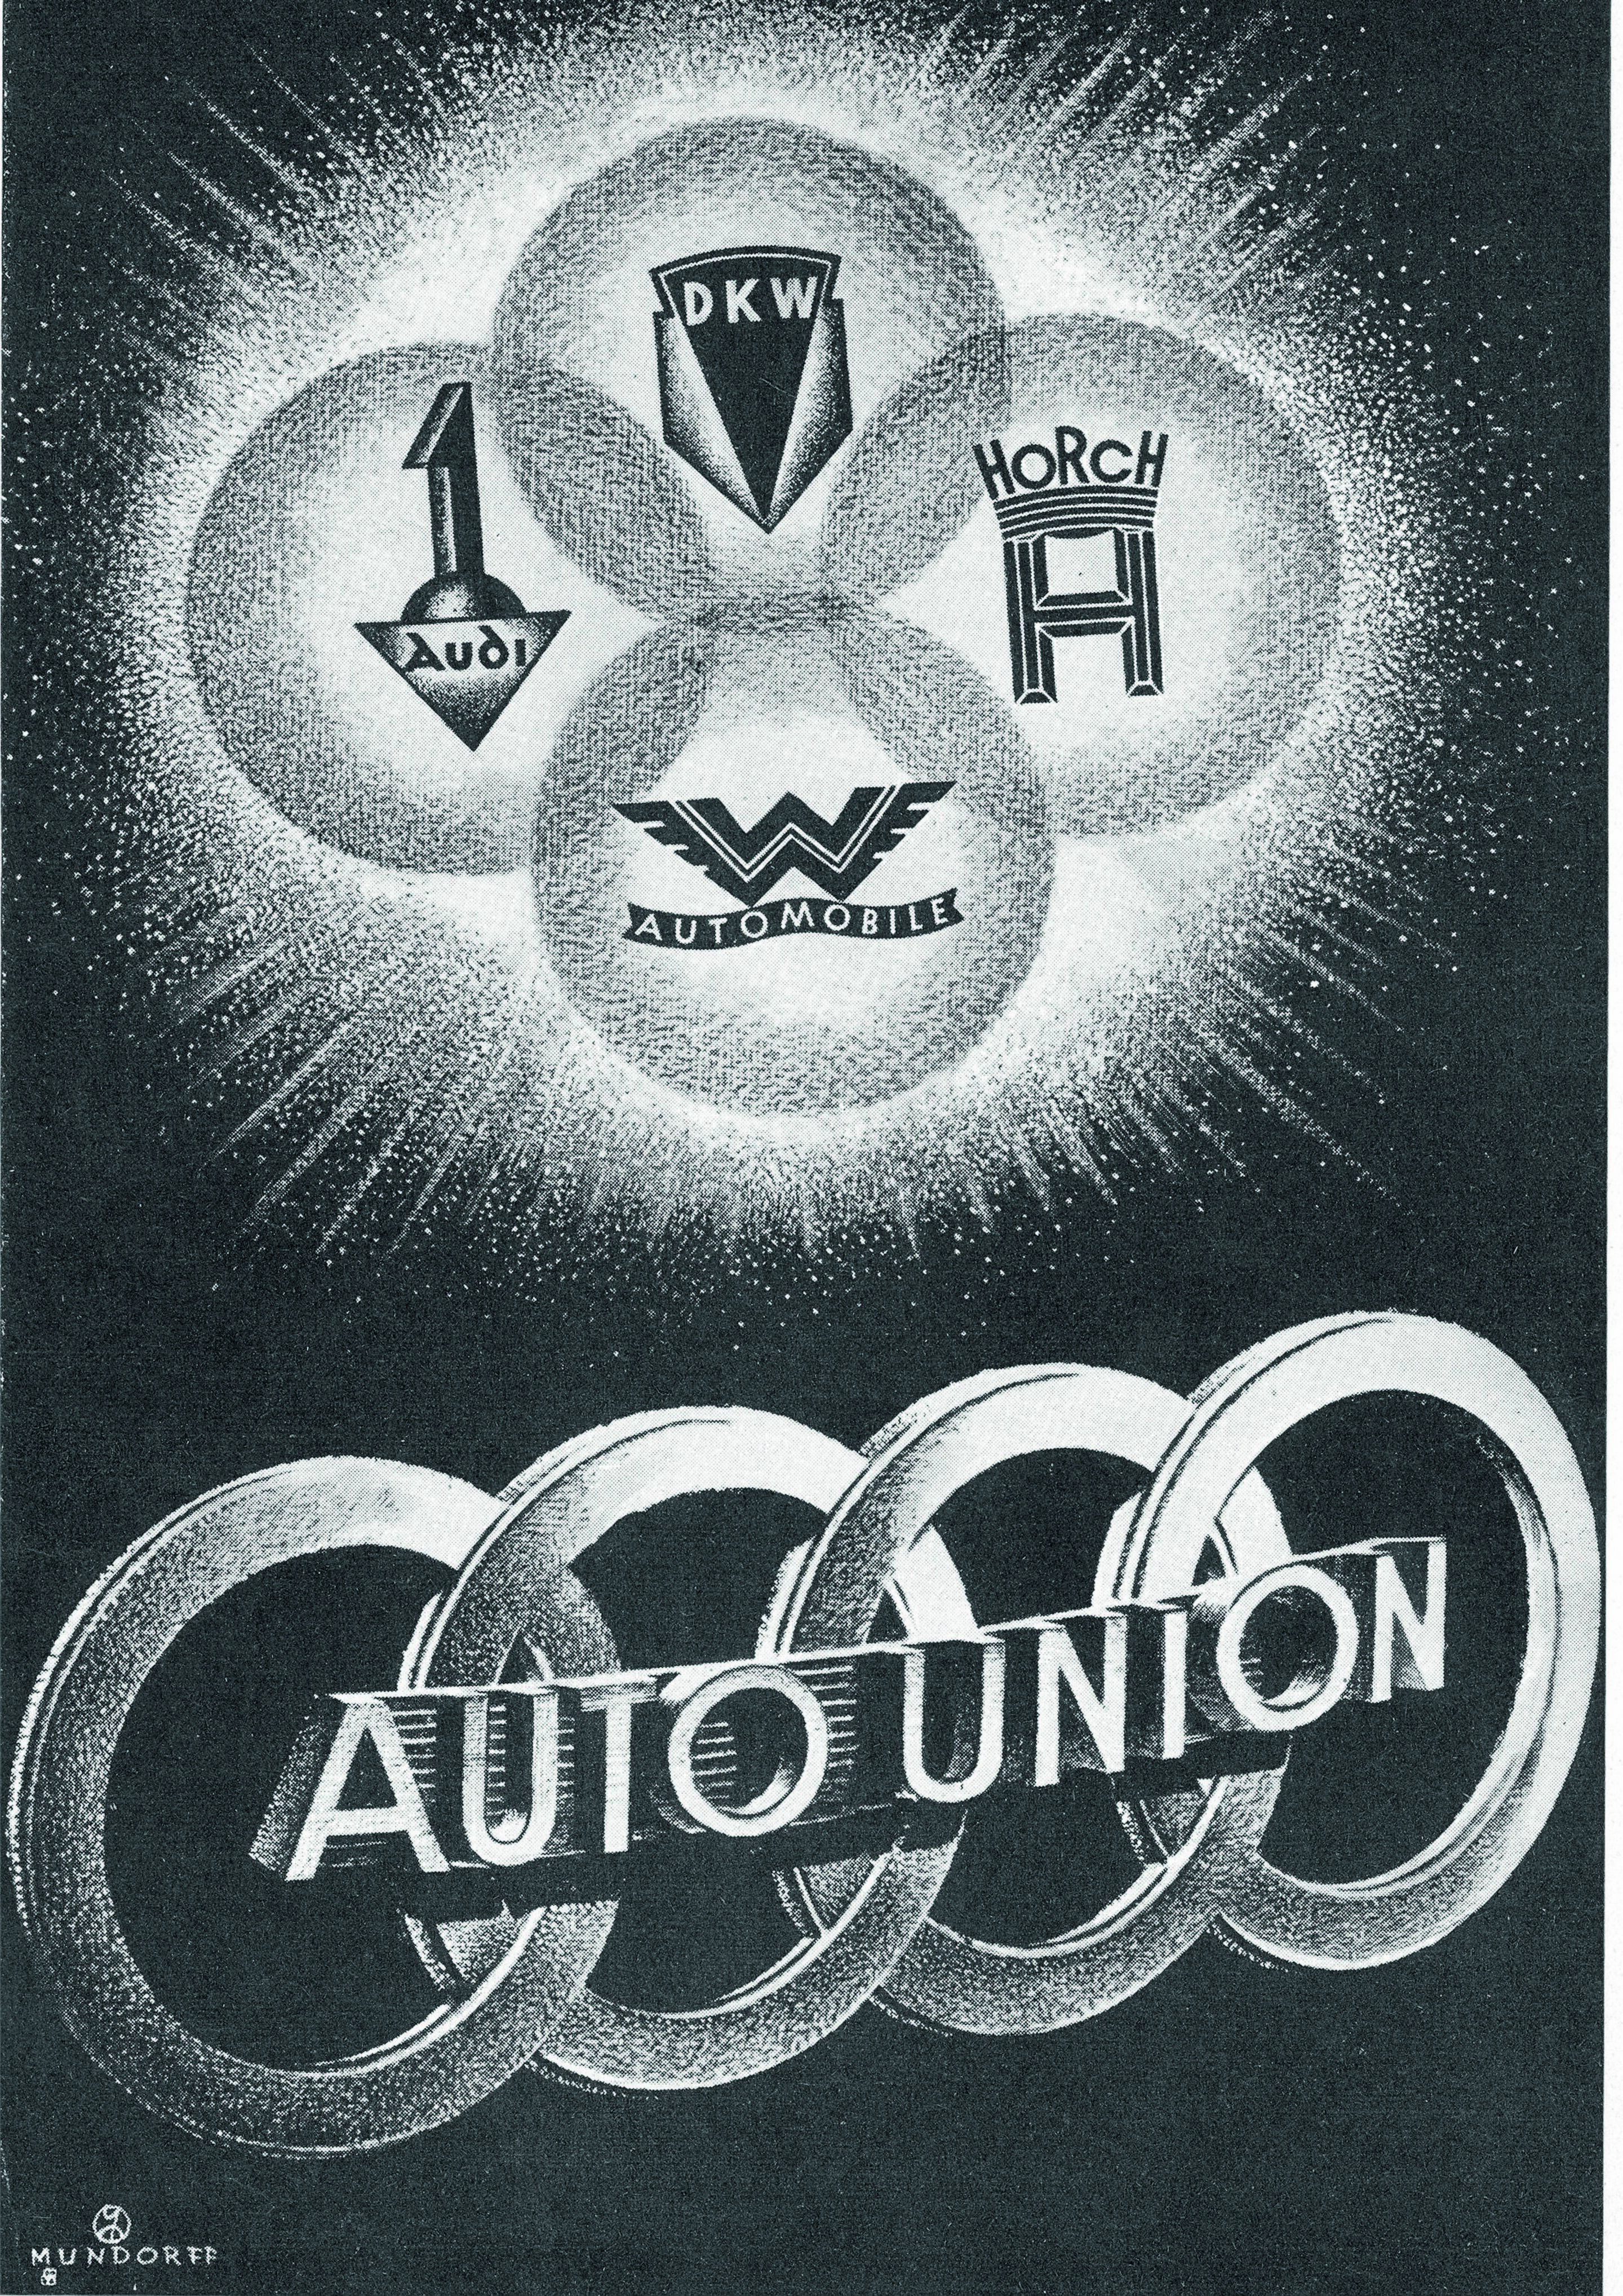 The Story Behind Audi's Four-Ring Logo